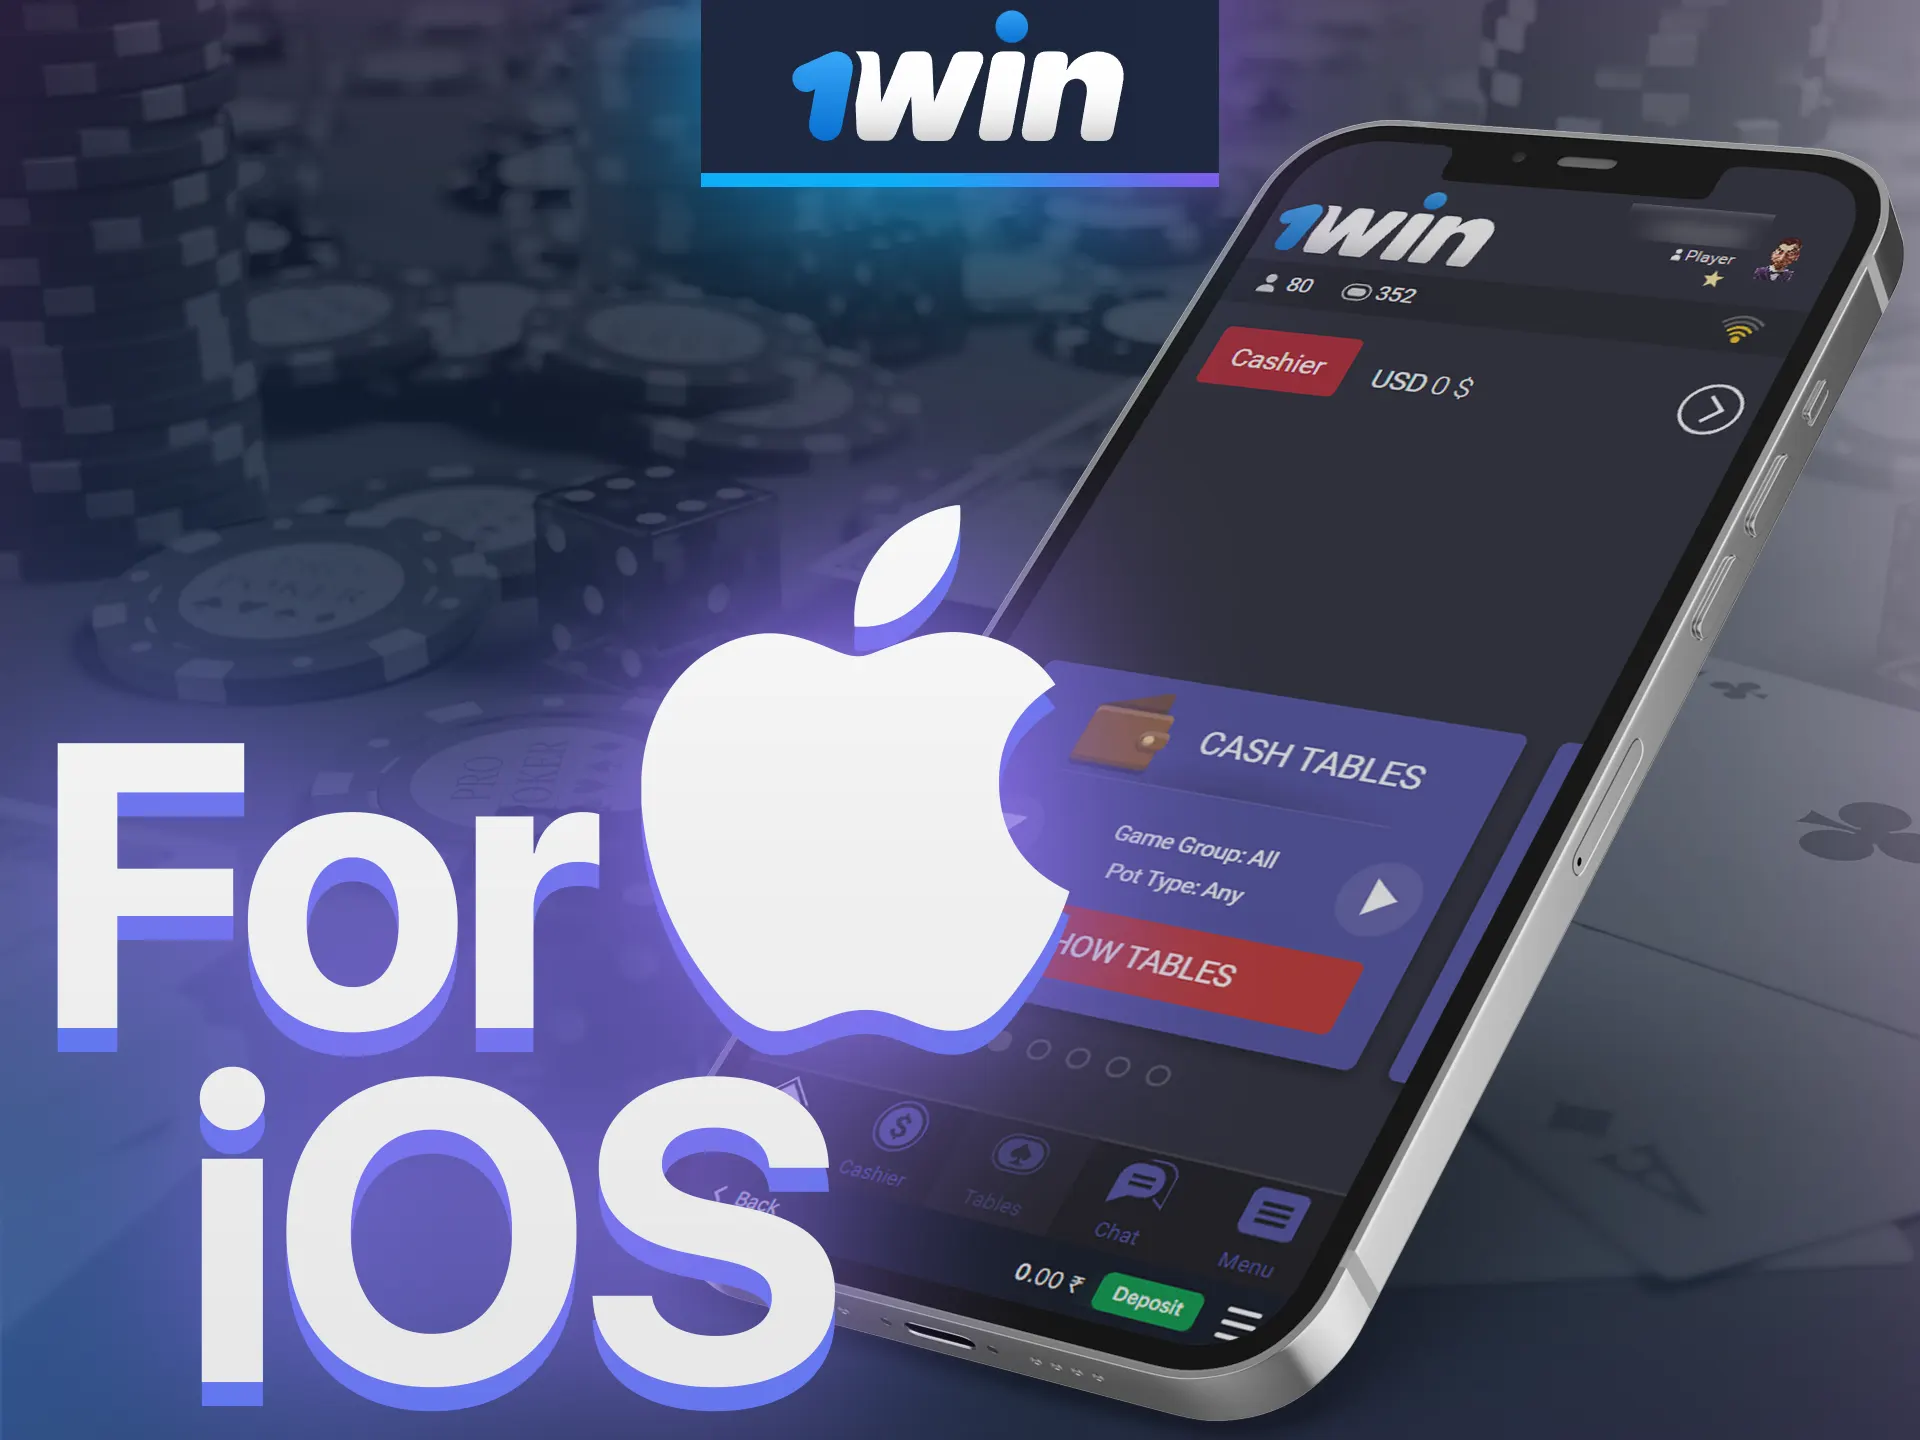 Play poker with 1Win from your iOS device.